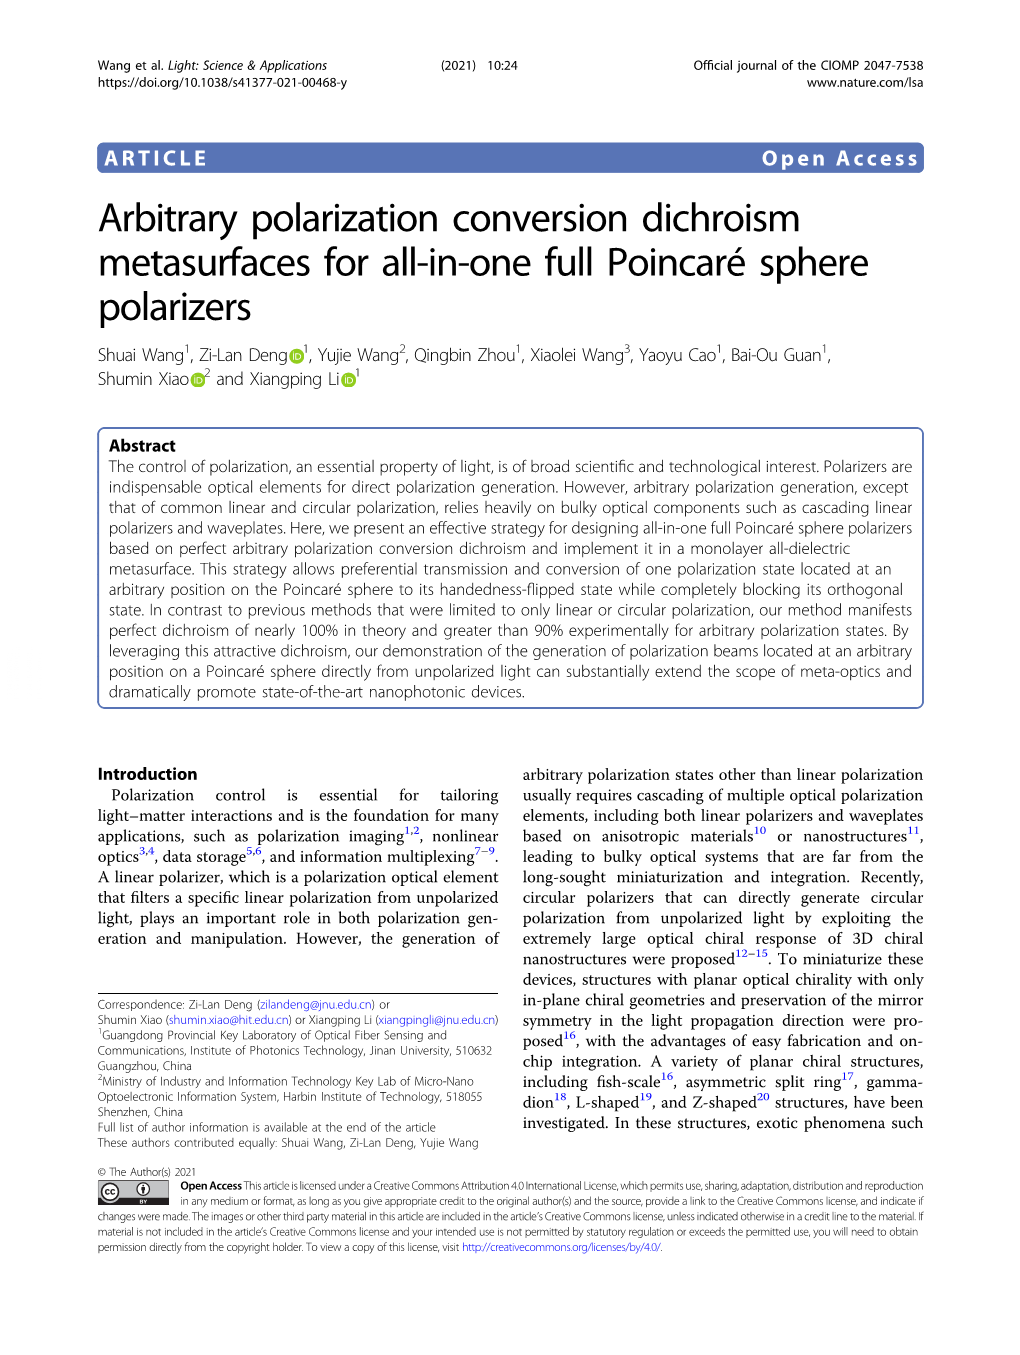 Arbitrary Polarization Conversion Dichroism Metasurfaces for All-In